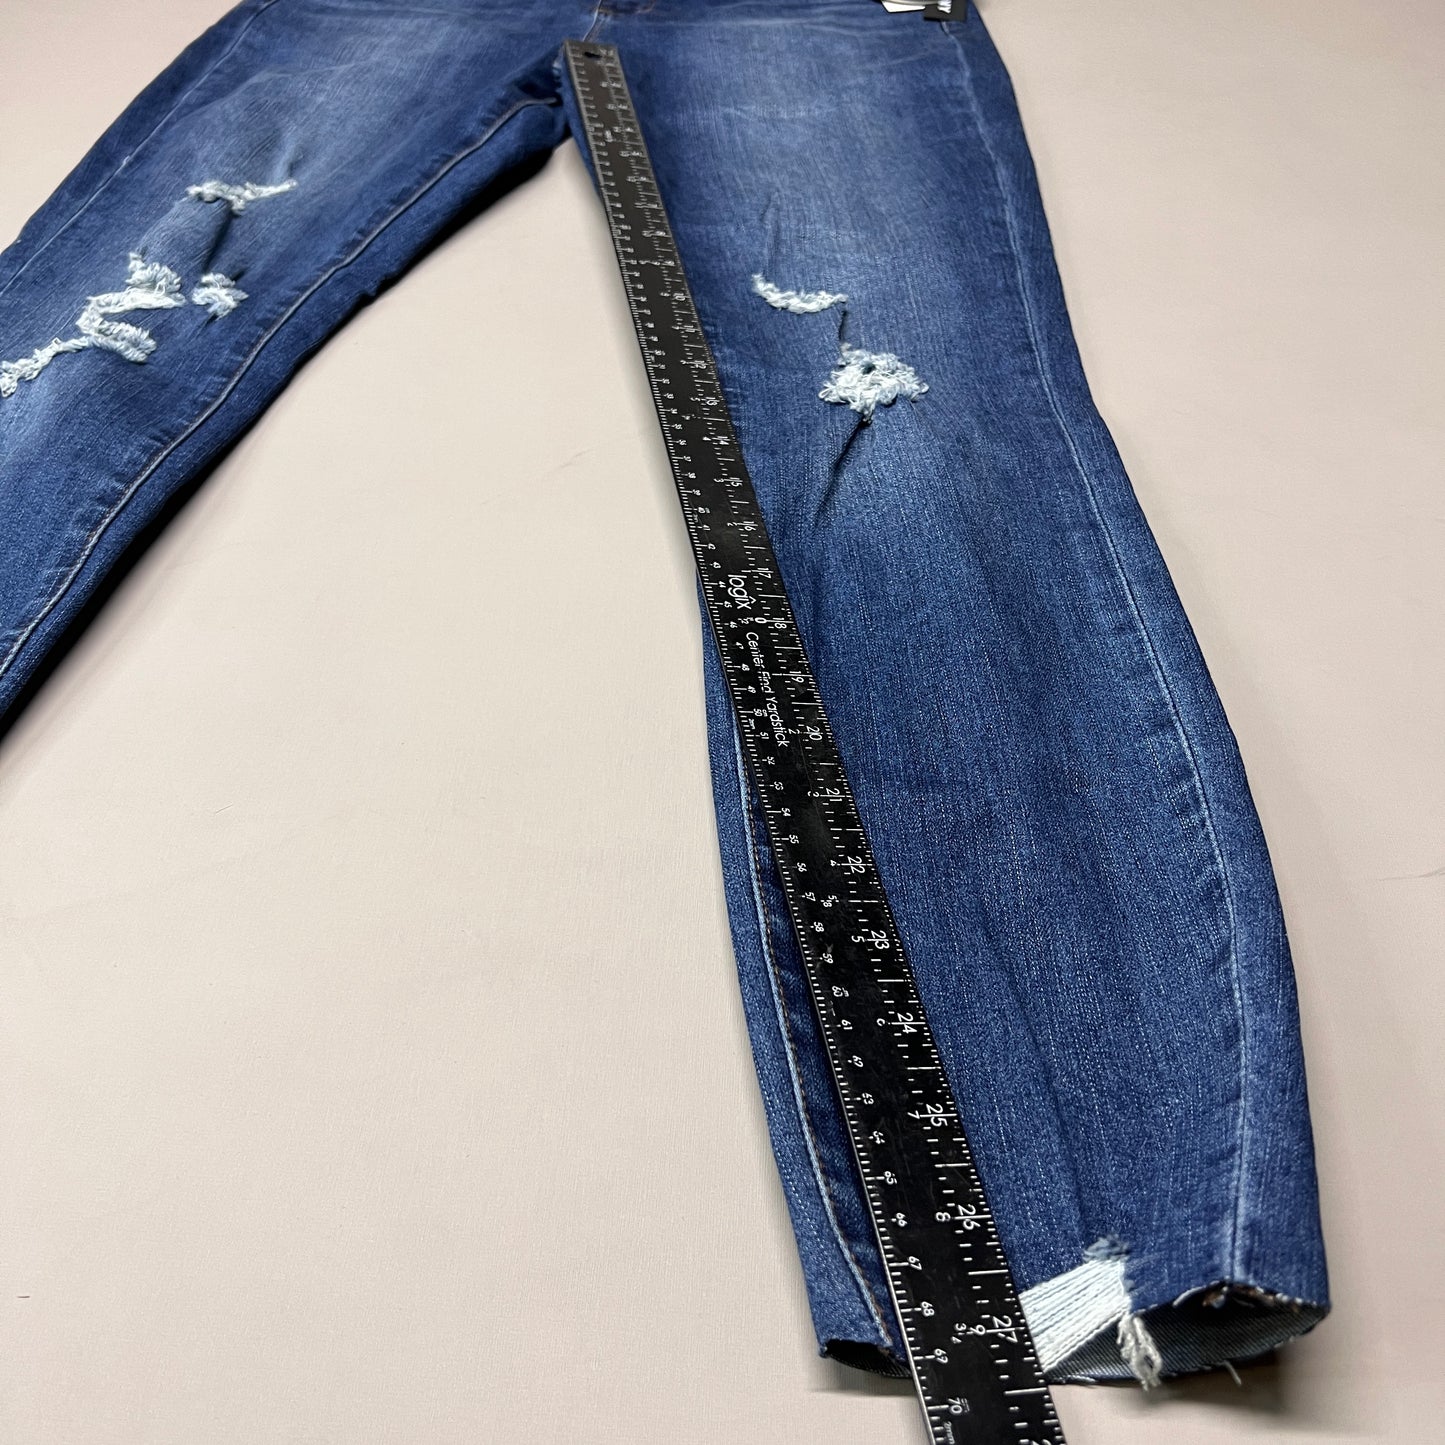 ARTICLES OF SOCIETY Hilo Ripped Denim Jeans Women's Sz 30 Blue 5350PLV-706 (New)